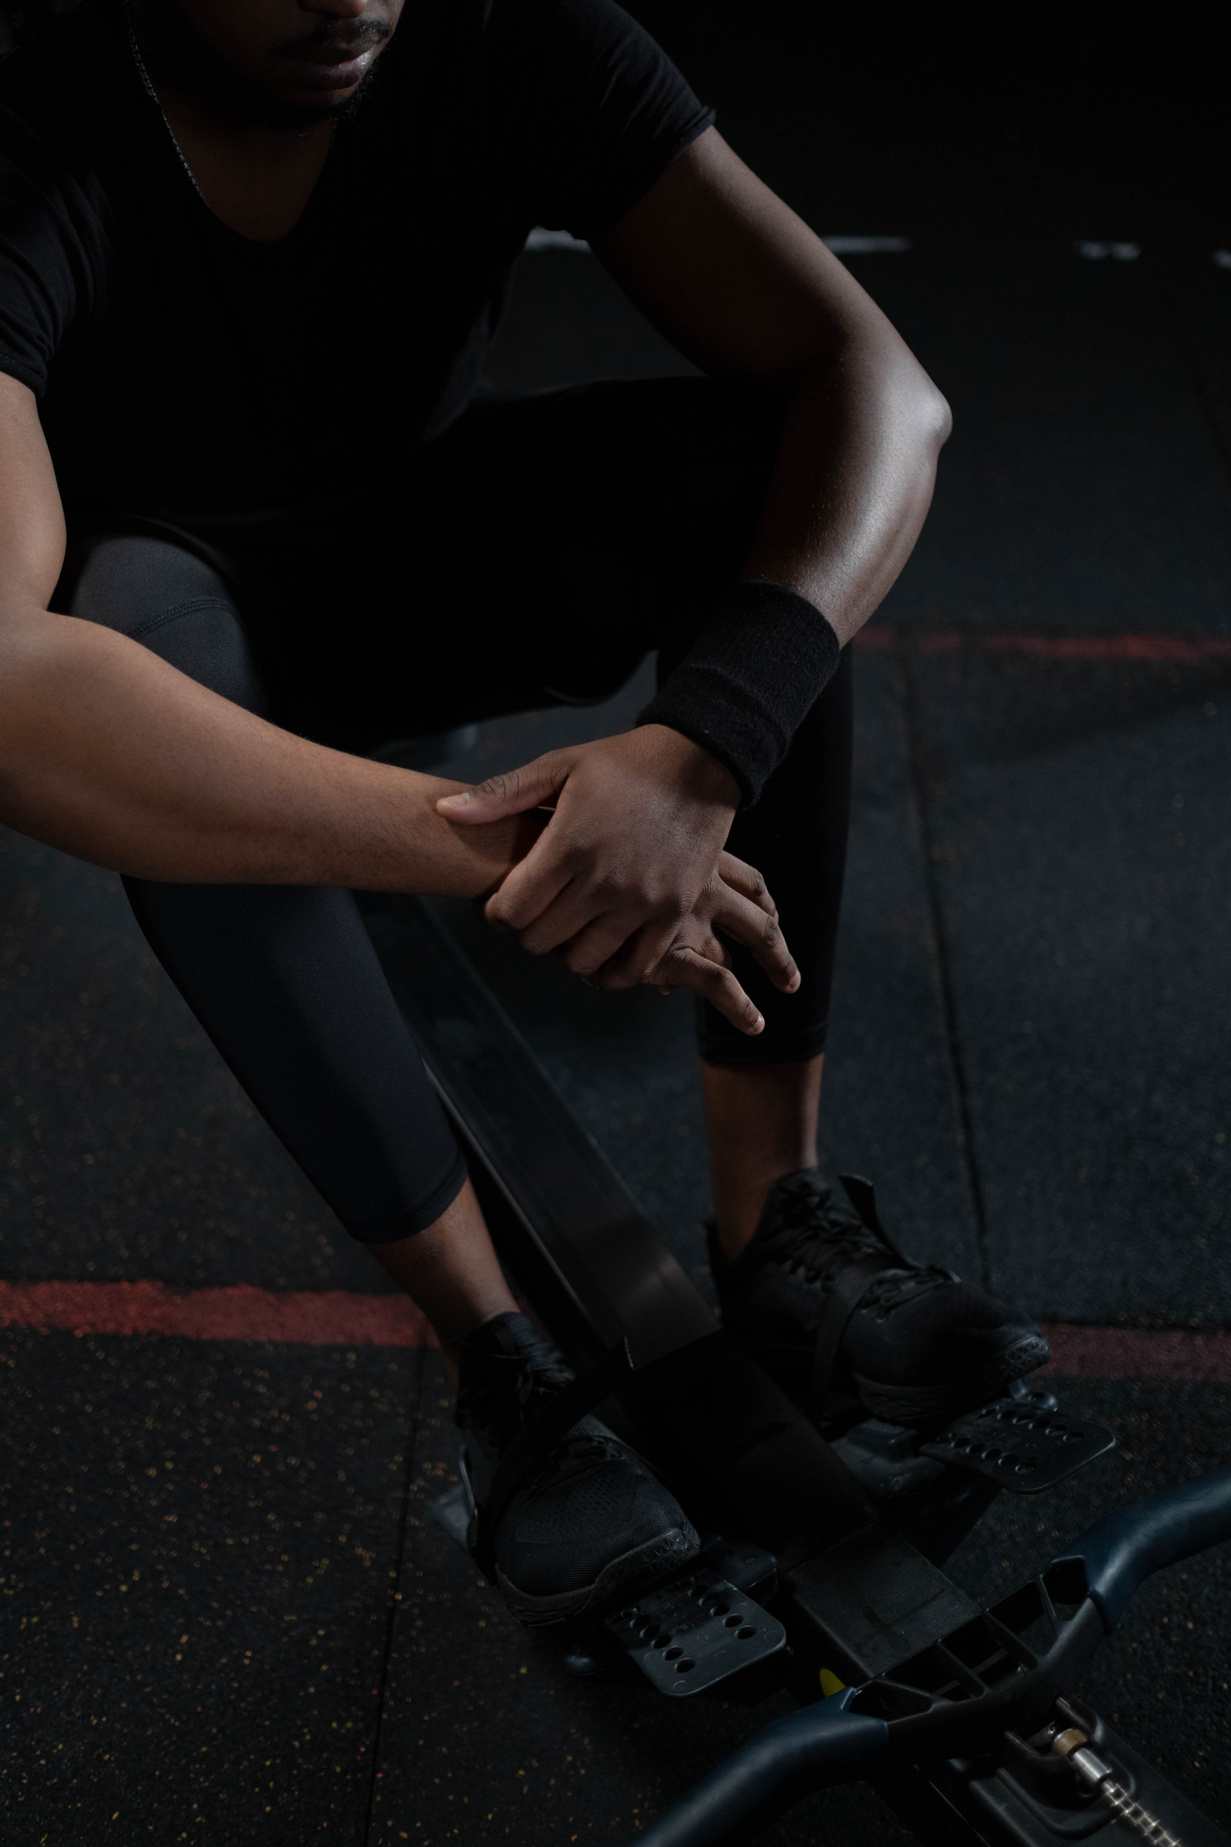 A Man in Black Activewear Resting